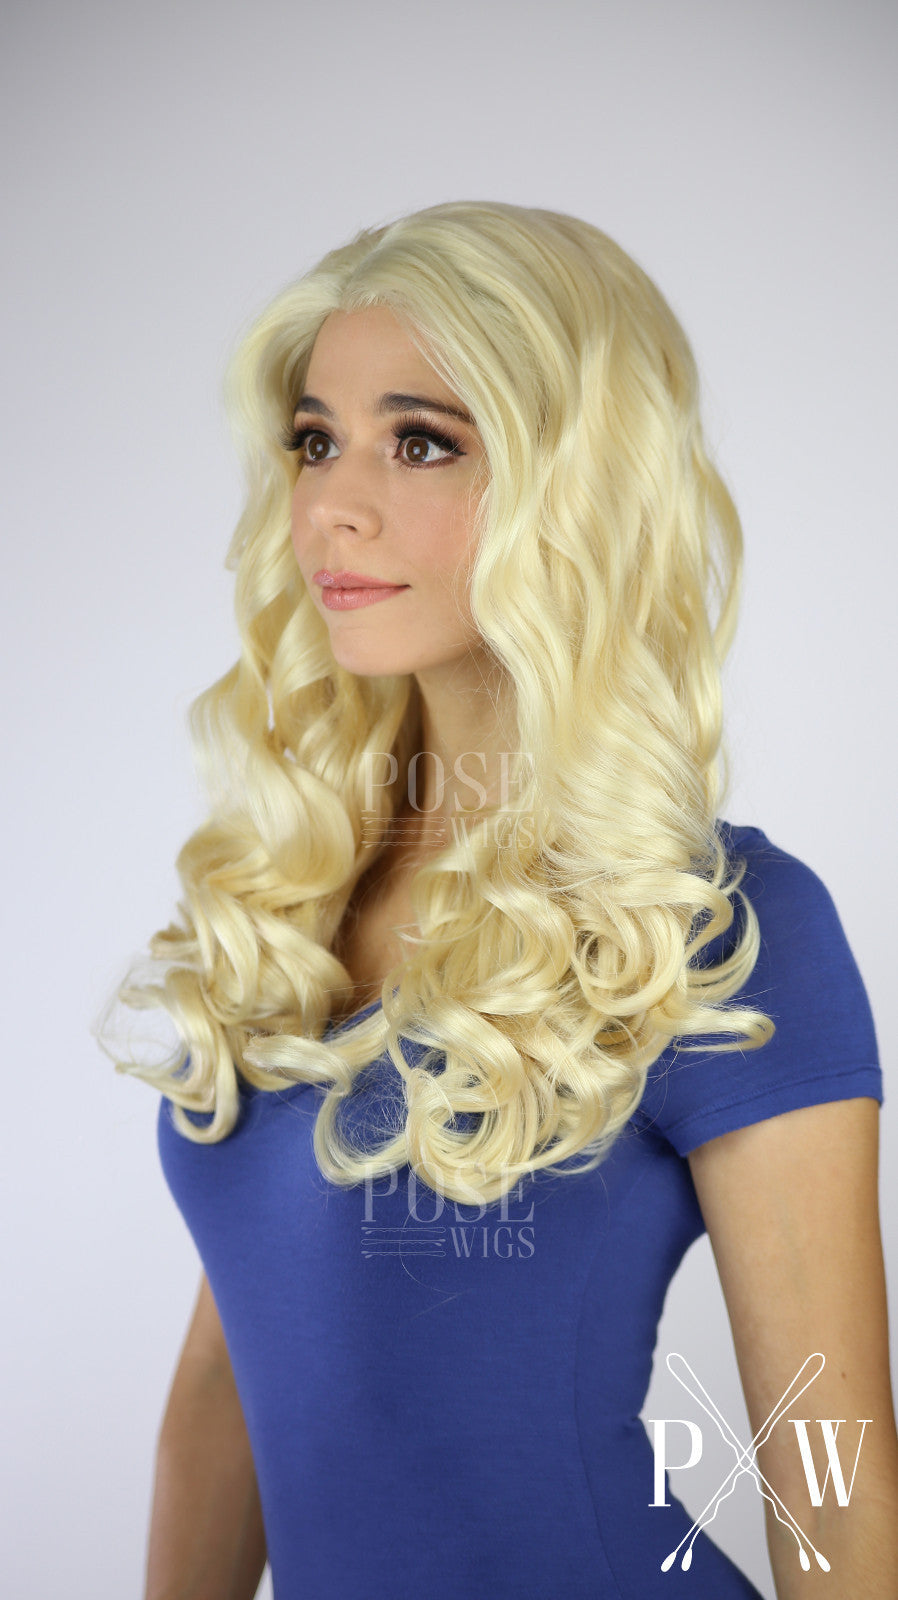 Blonde Long Curly Lace Front Wig - Princess Series LP133